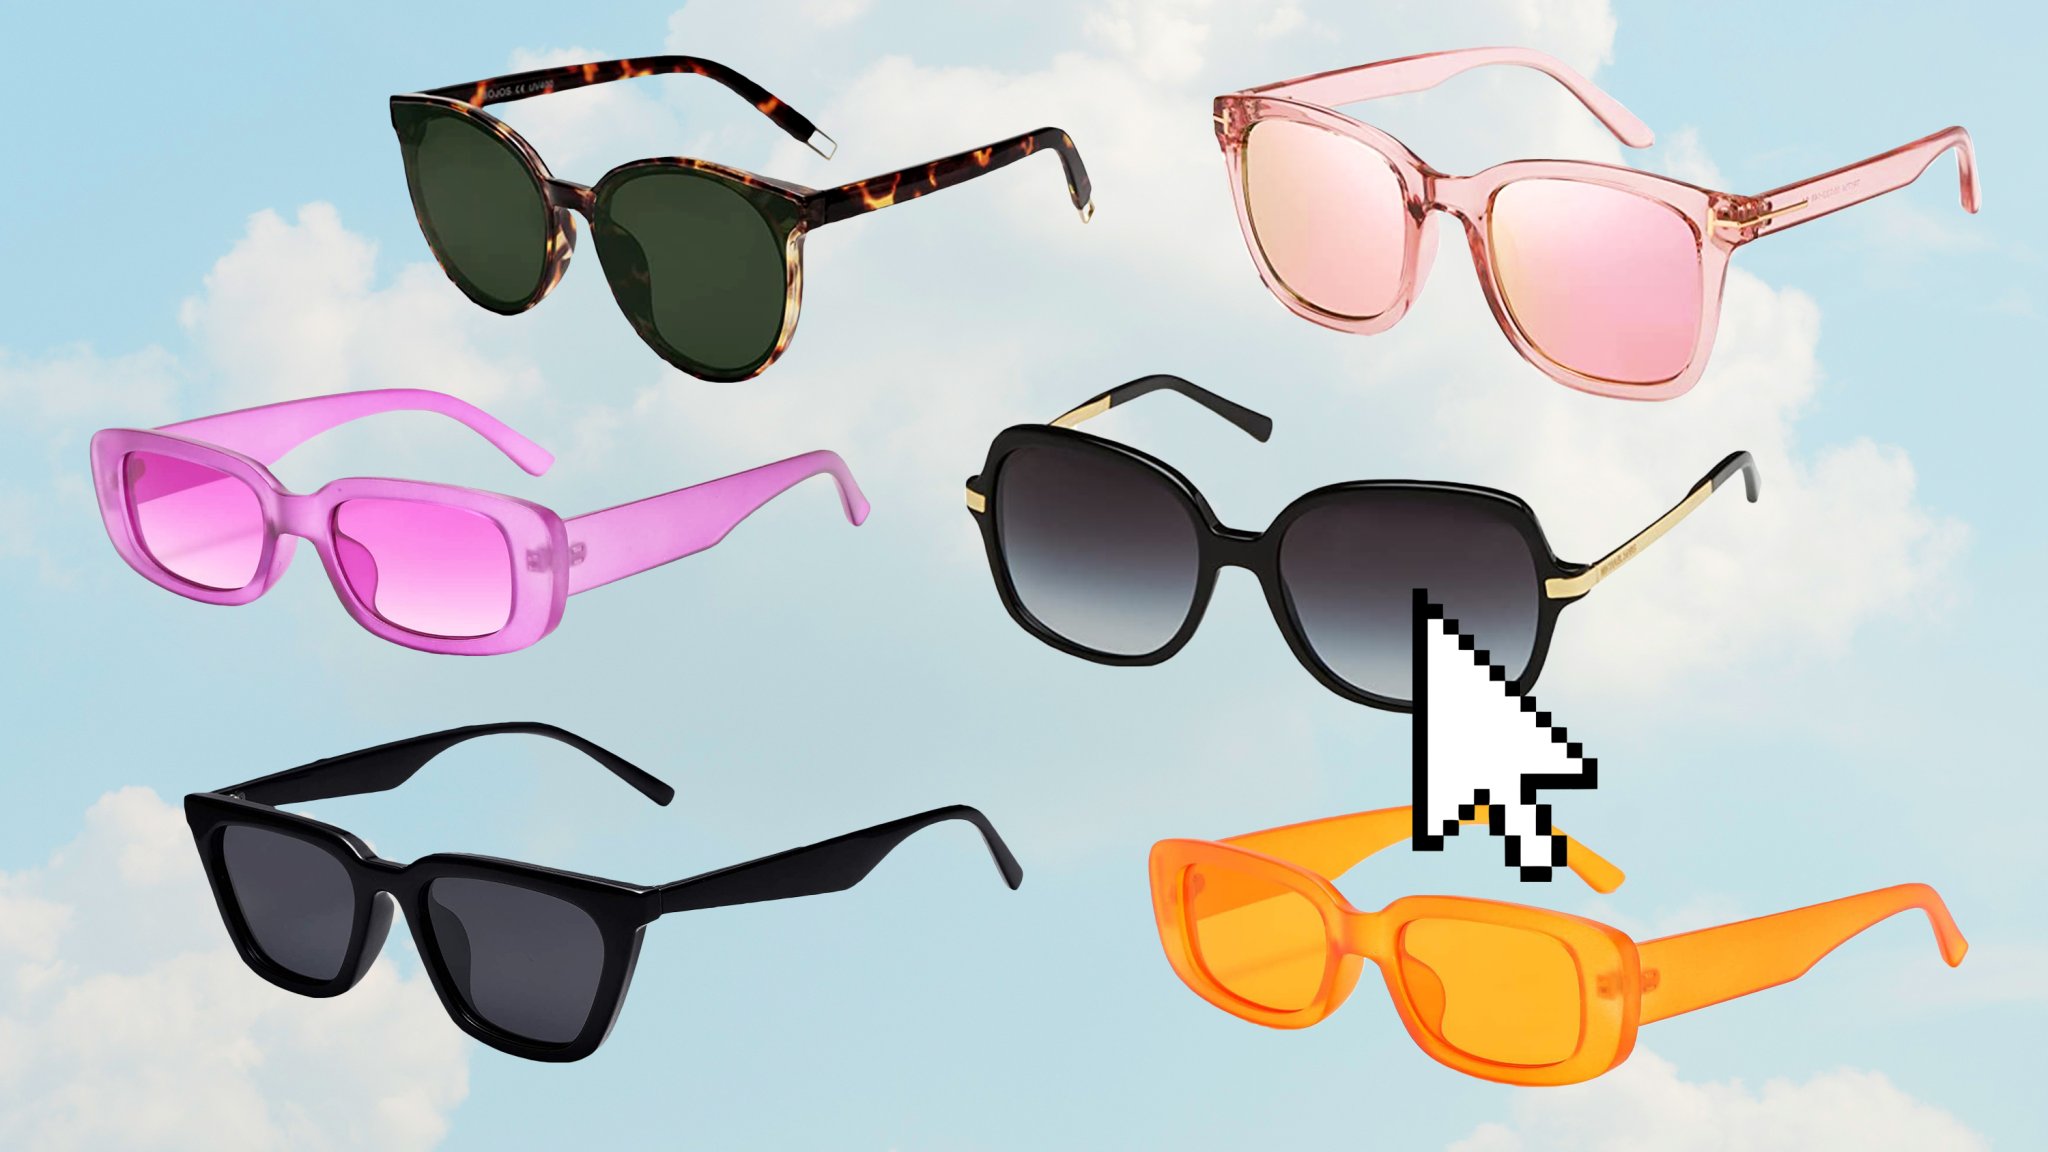 The 20 Best Sunglasses on Amazon, According to Reviews